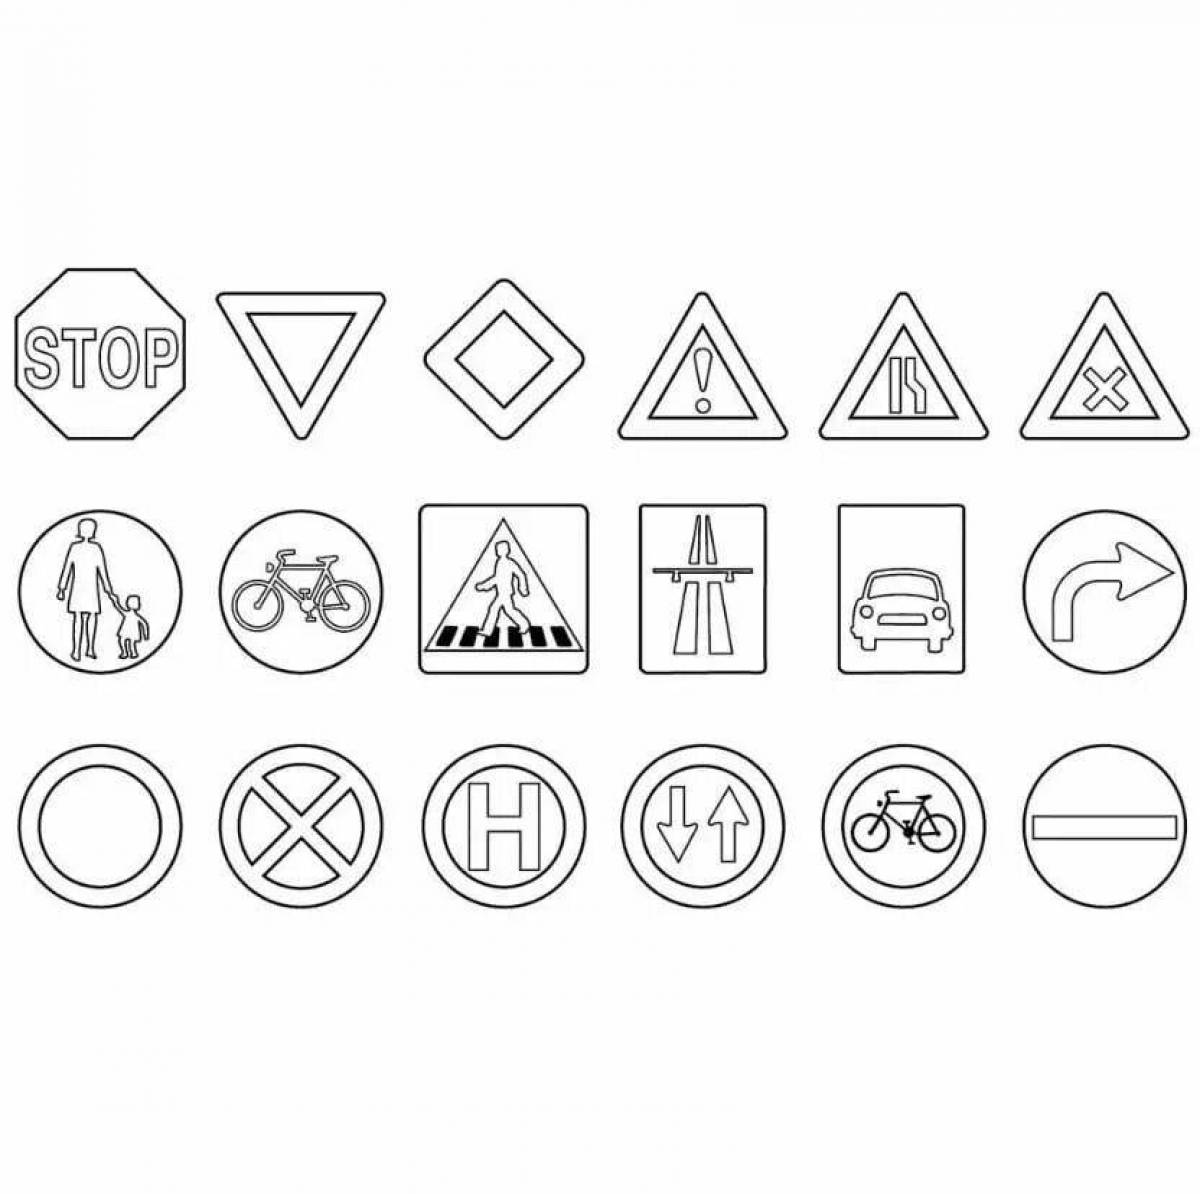 Colorful road signs coloring pages for kids